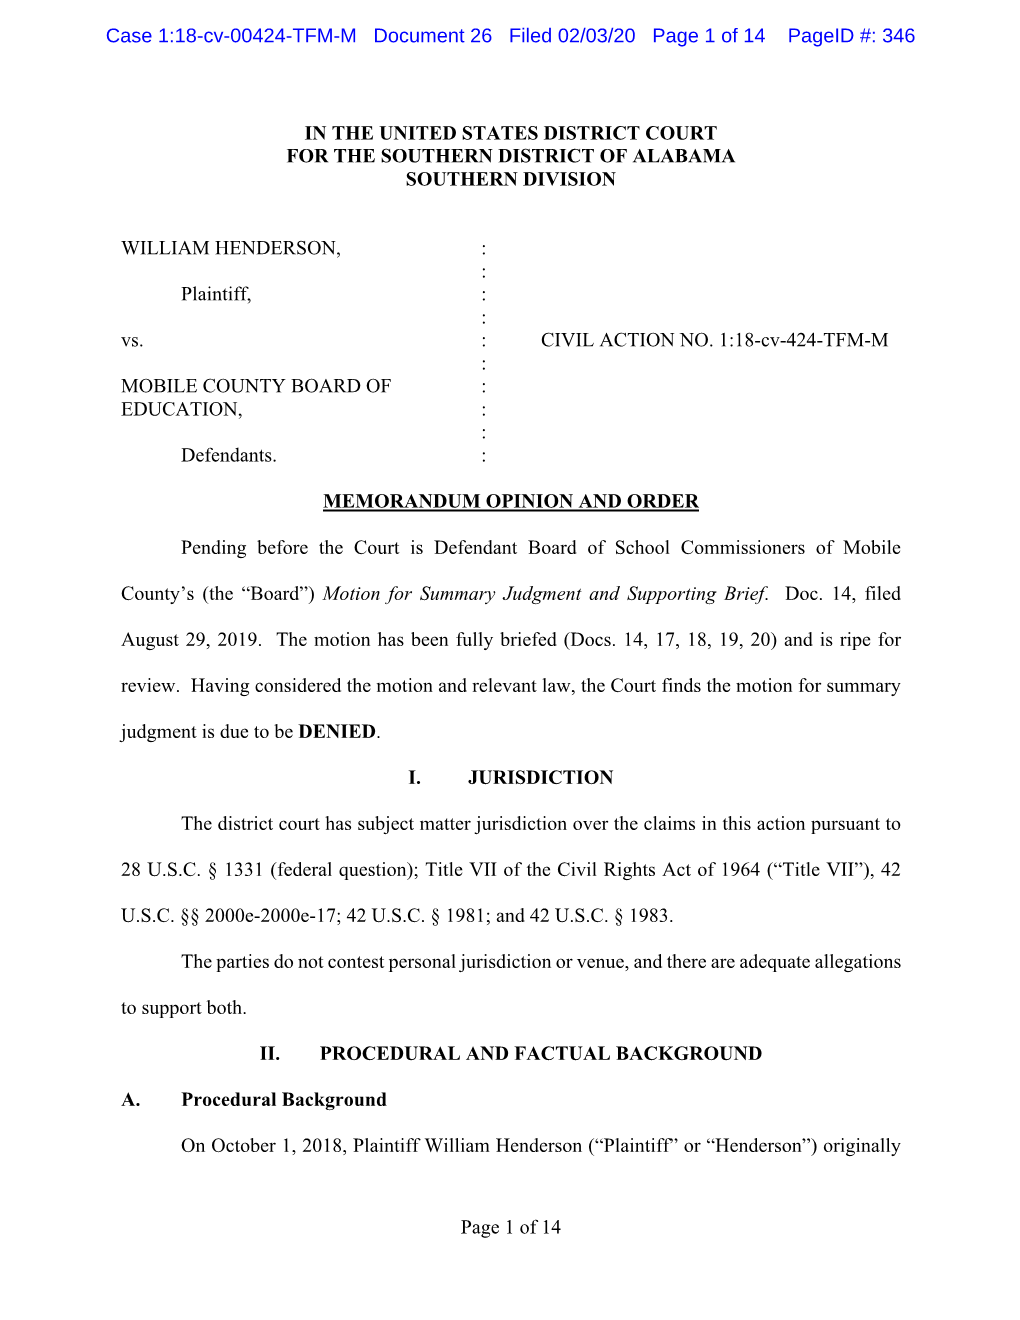 Page 1 of 14 in the UNITED STATES DISTRICT COURT for THE